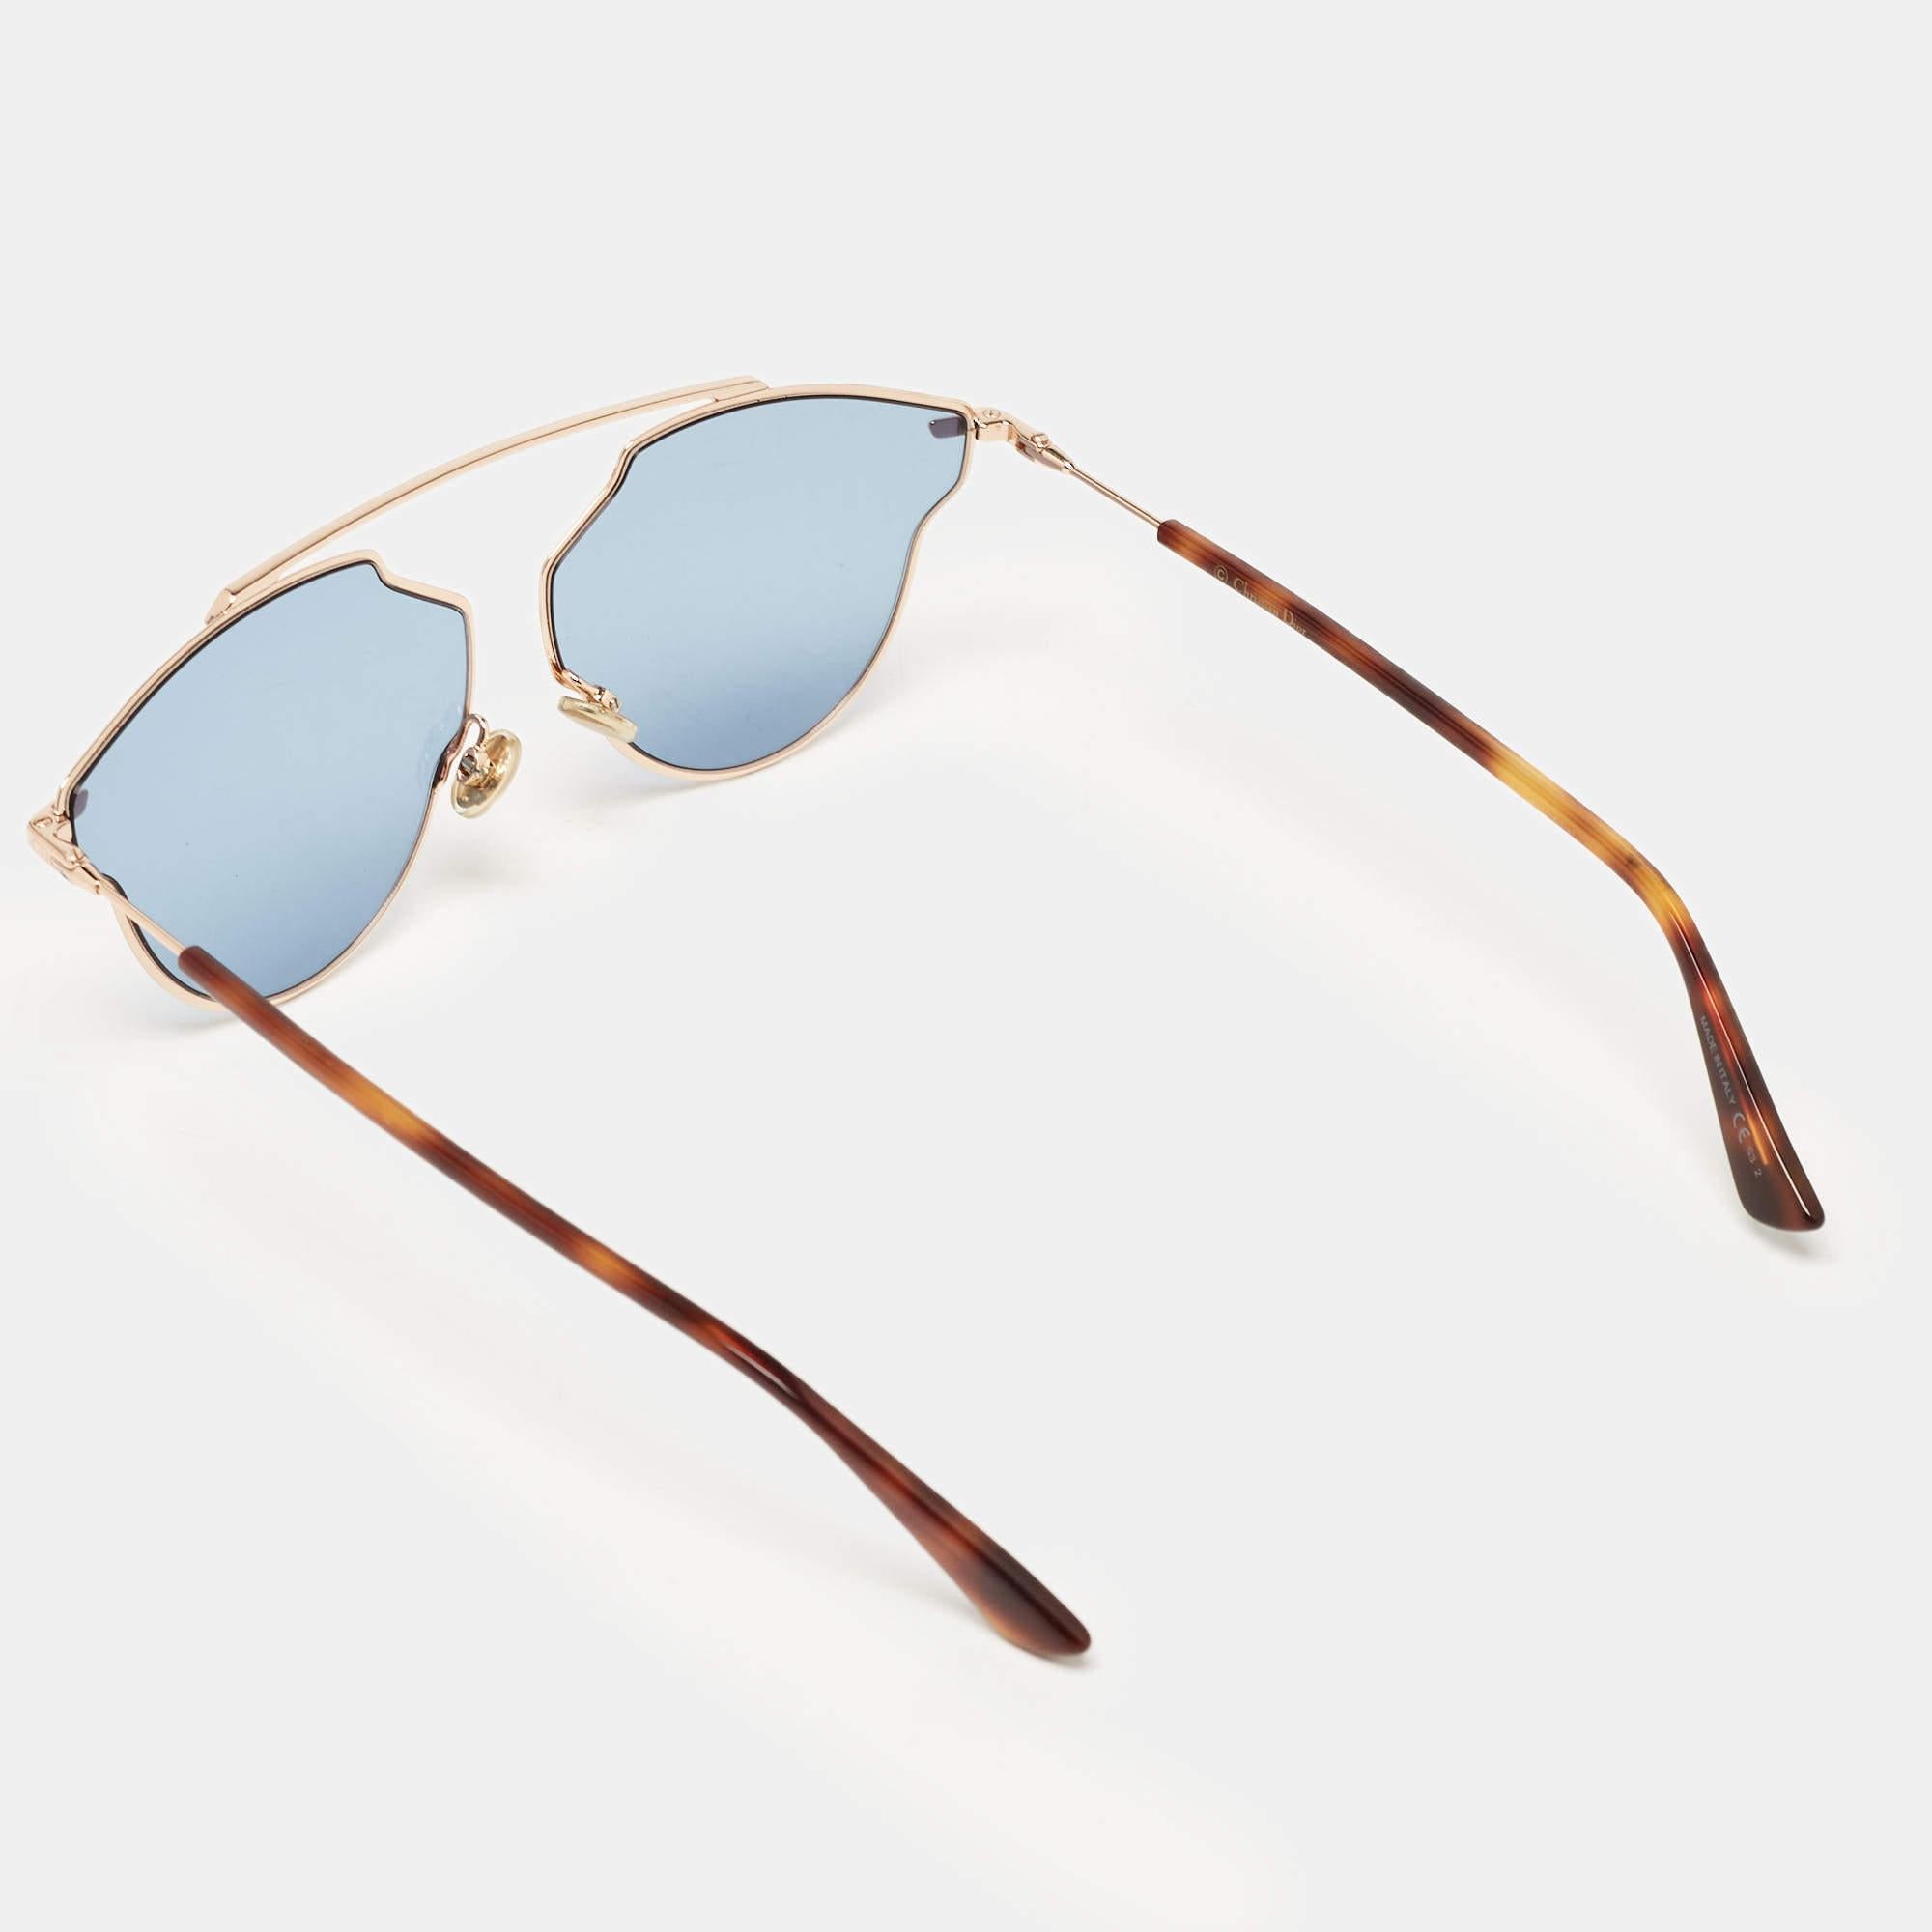 Styled to eloquently express your style, these Dior sunglasses come in an aviator frame with sturdy temples and brand detailing on the sides. While its design will make you stand out, the blue lenses will provide sufficient protection.

Includes: